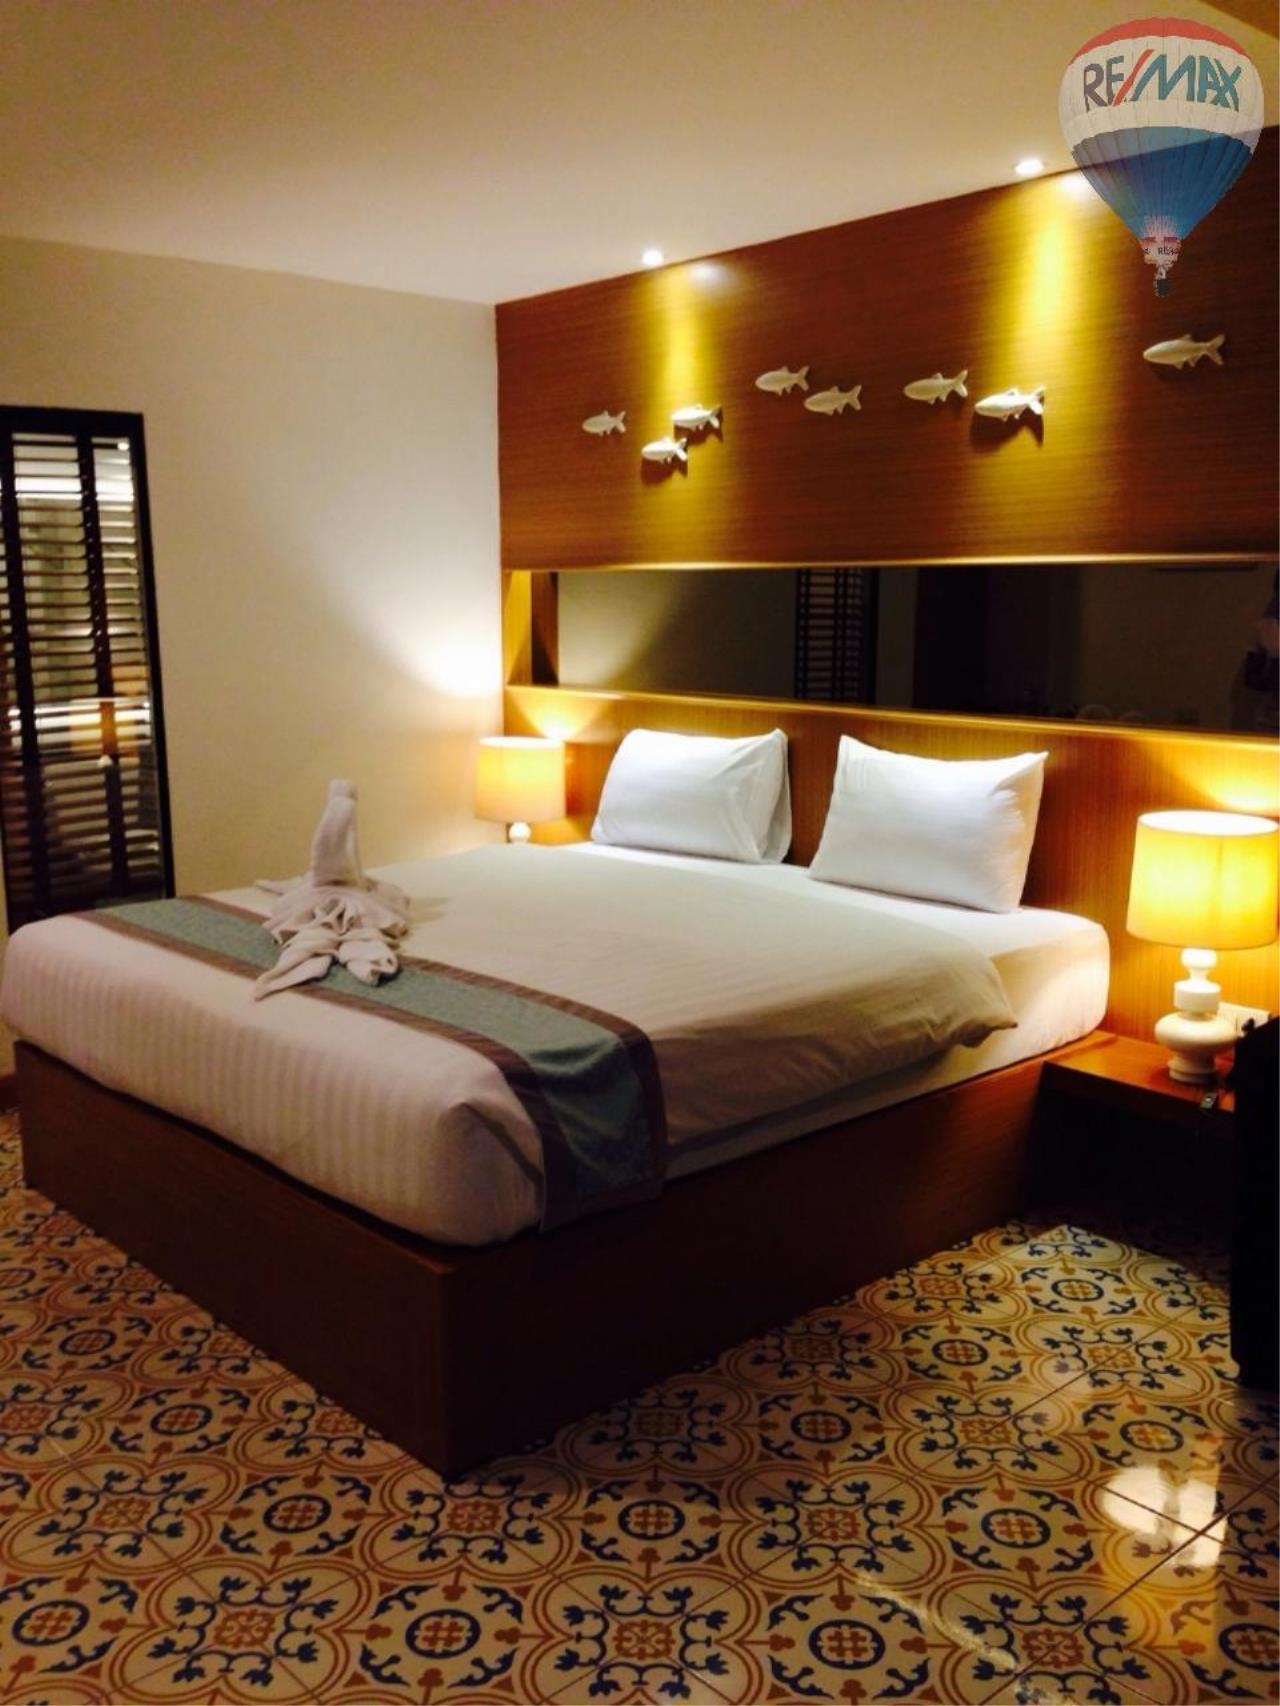 RE/MAX Top Properties Agency's 62 Rooms hotel Well Located Patong Beach 23